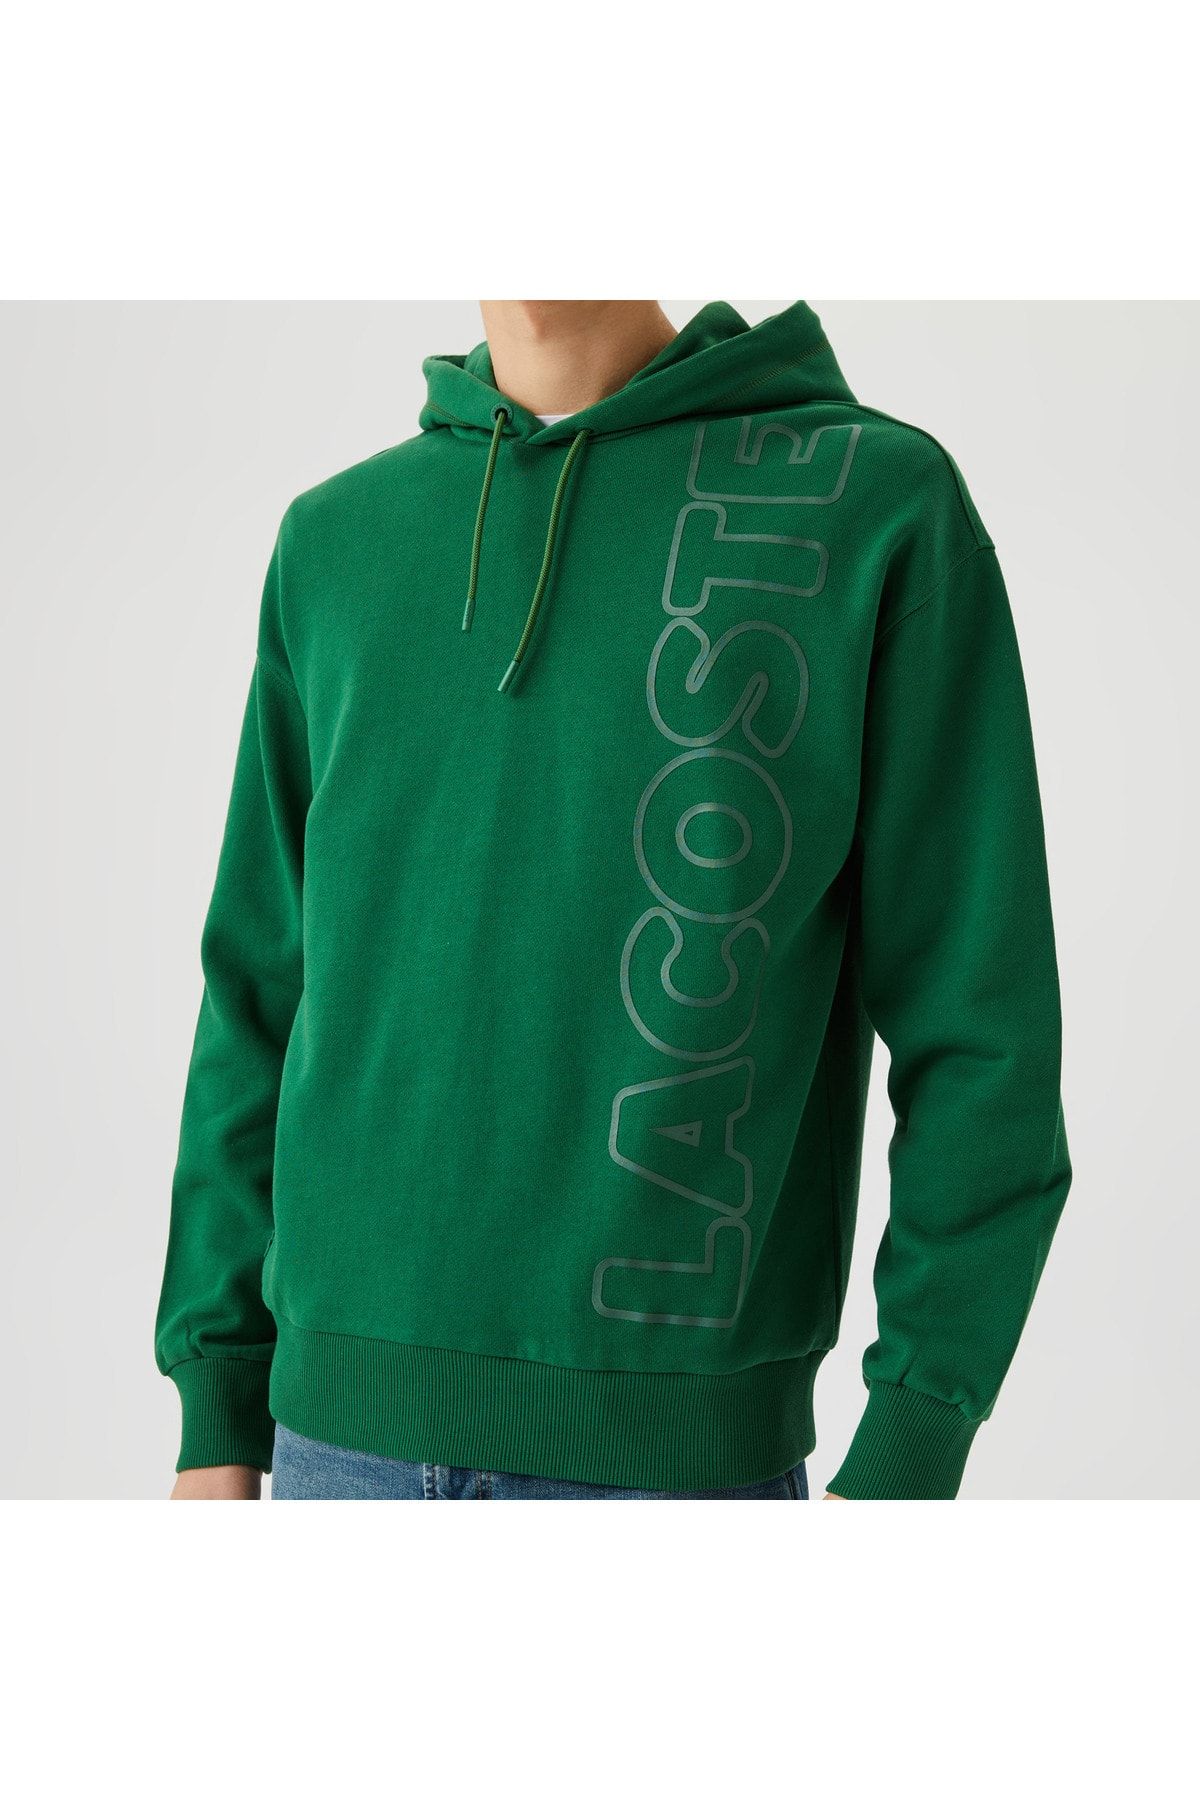 Lacoste Unisex Relax Fit Cooded Green پیراهن سبز